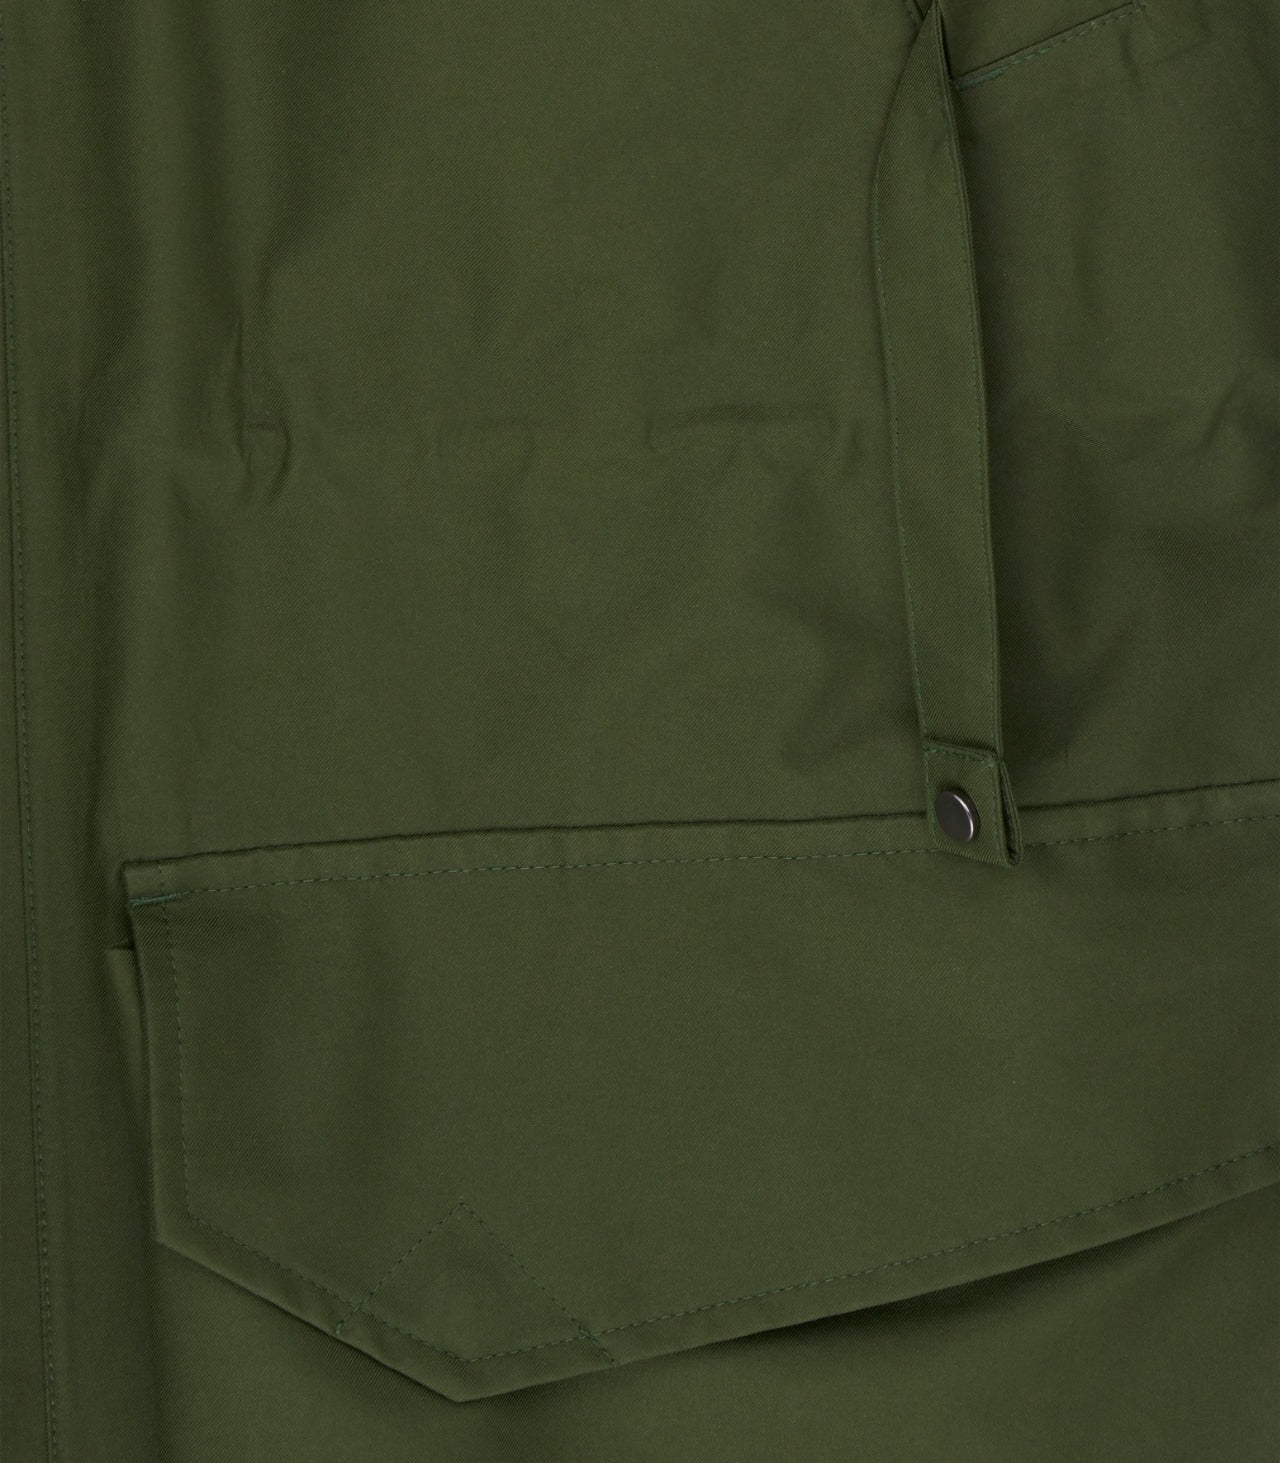 Unisex Technical Vatersay Sporting Cape In Rifle Green – Purdey